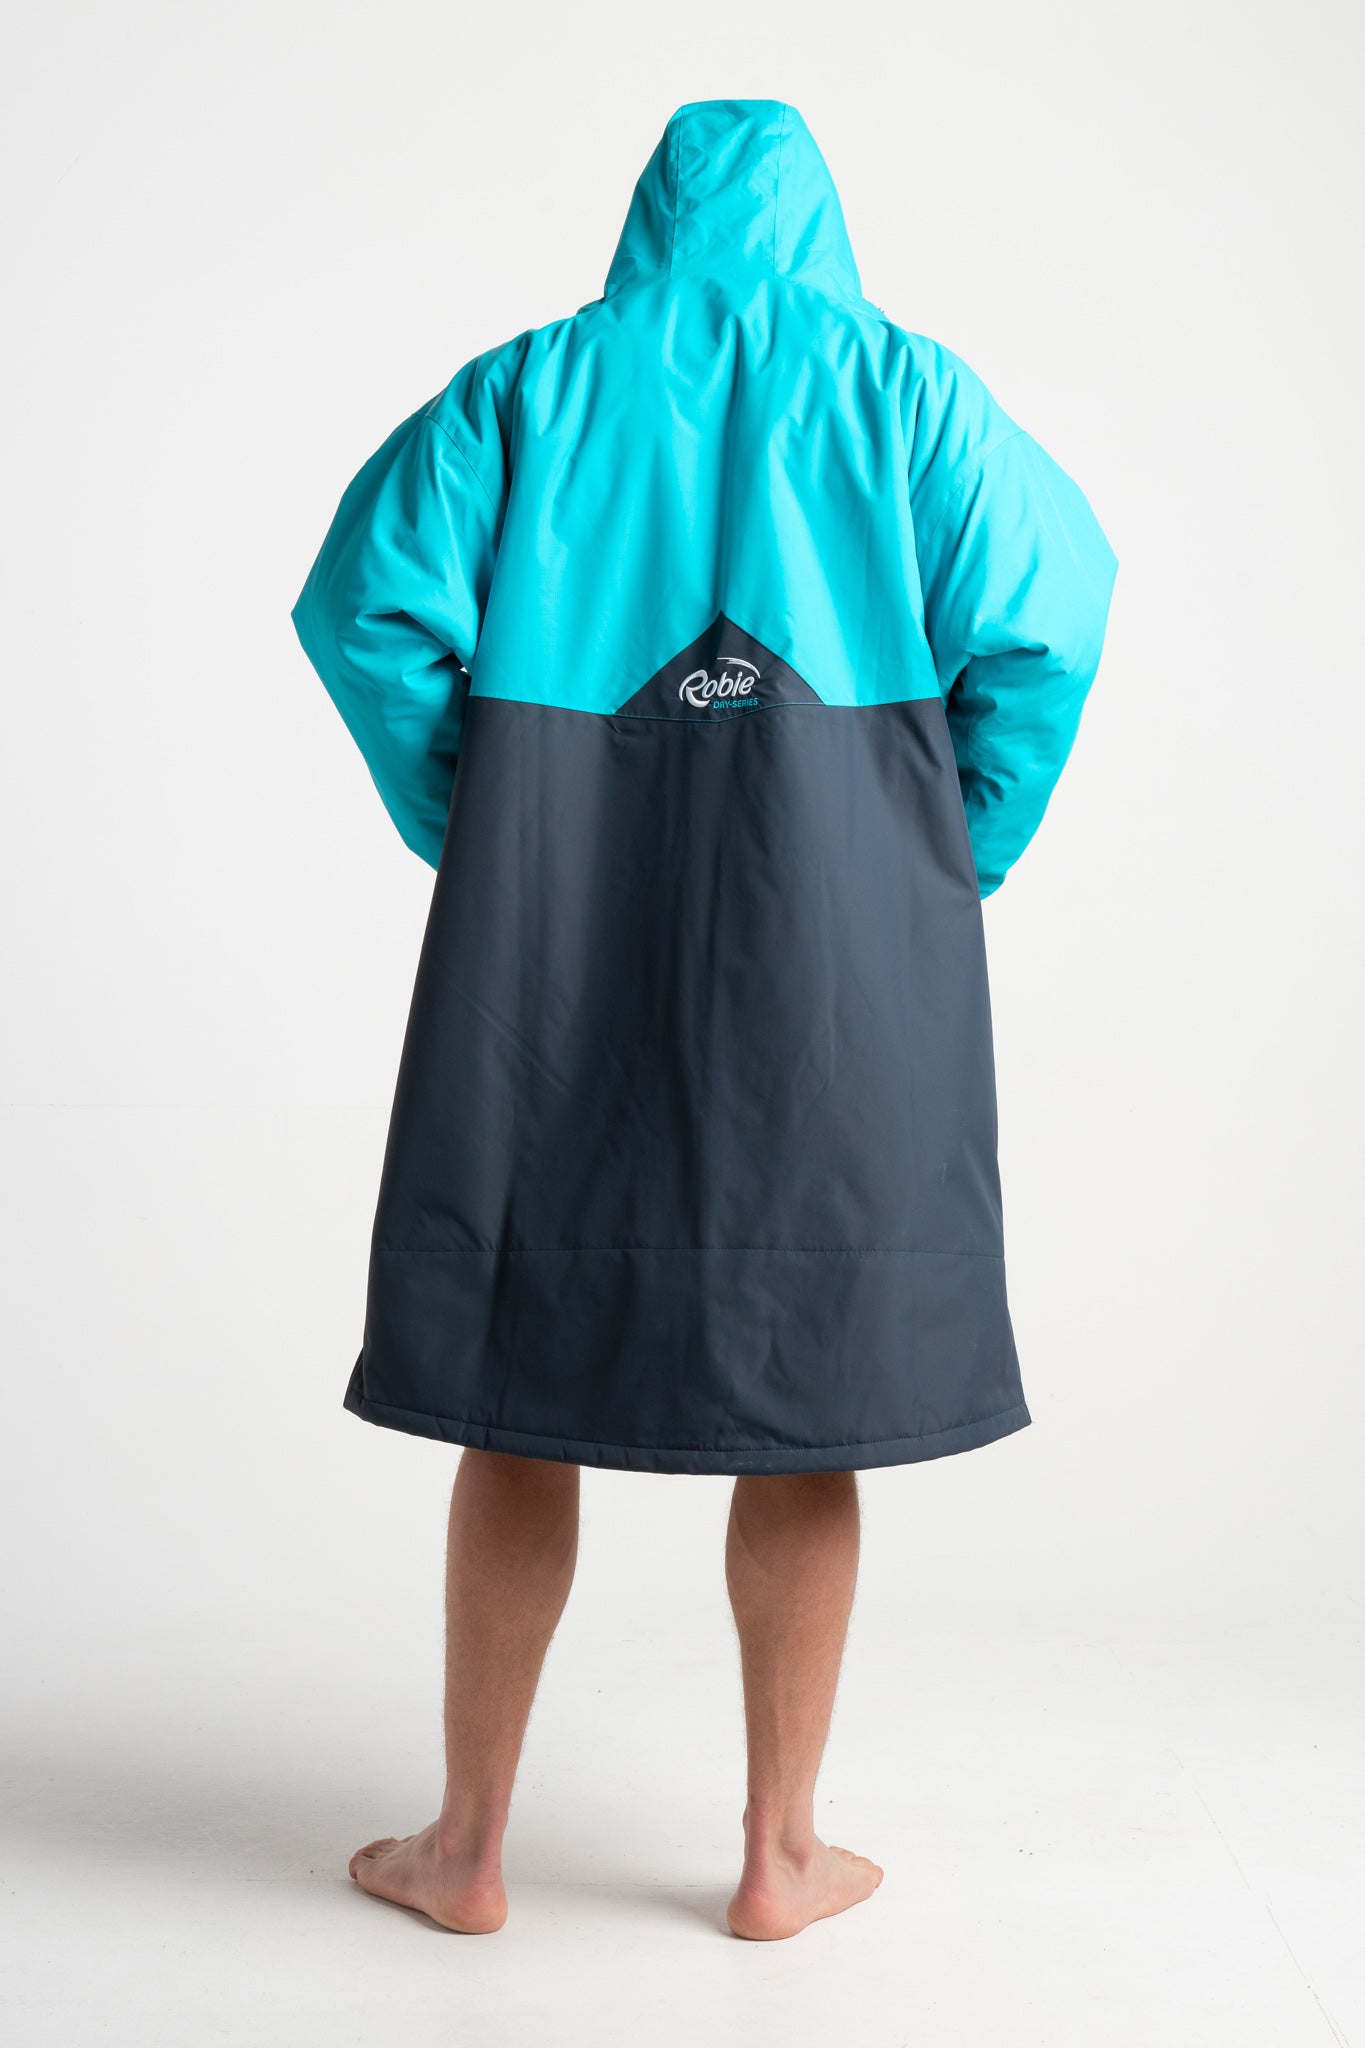 robie-robes-dry-series-changing-robe-waterproof-preorder-product-blacksheepsurfco-galway-ireland-india-ink-blue-atoll-small2